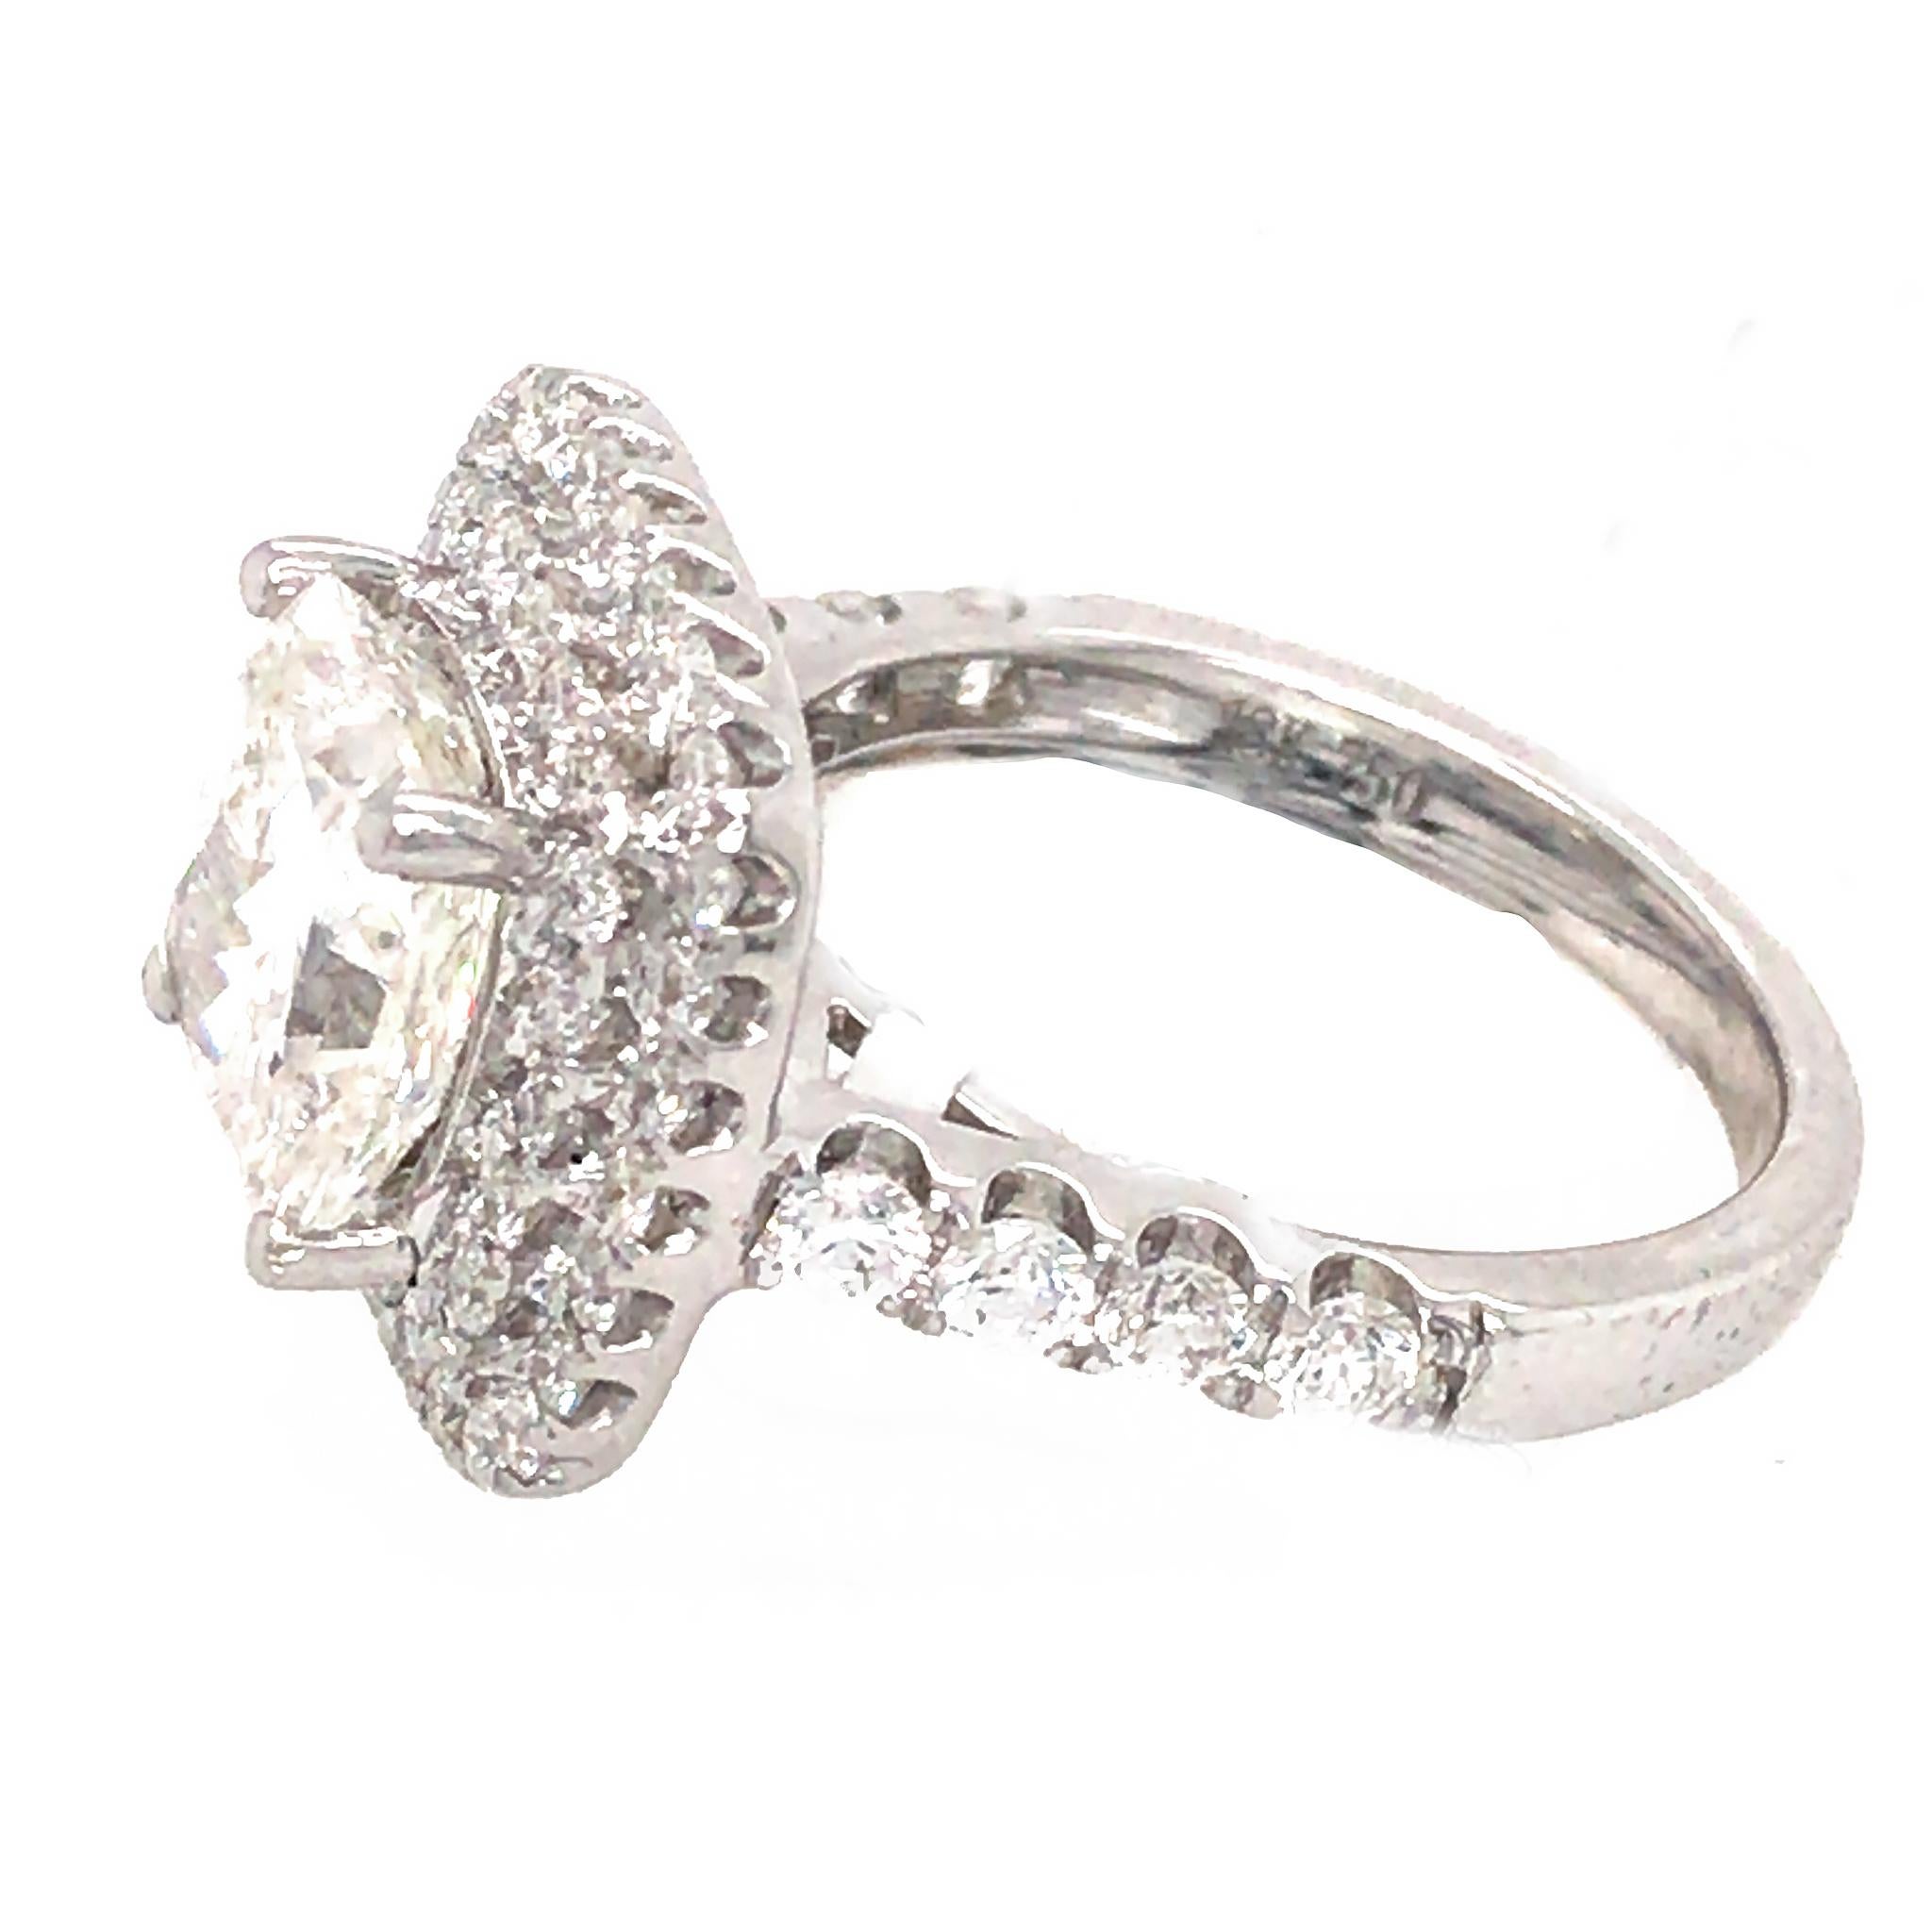 18k White Gold
Diamond:  3.04 ct (center) 
Color: H
Clarity: SI2
Ring Size: 5.75
Total Weight: 6.82 grams